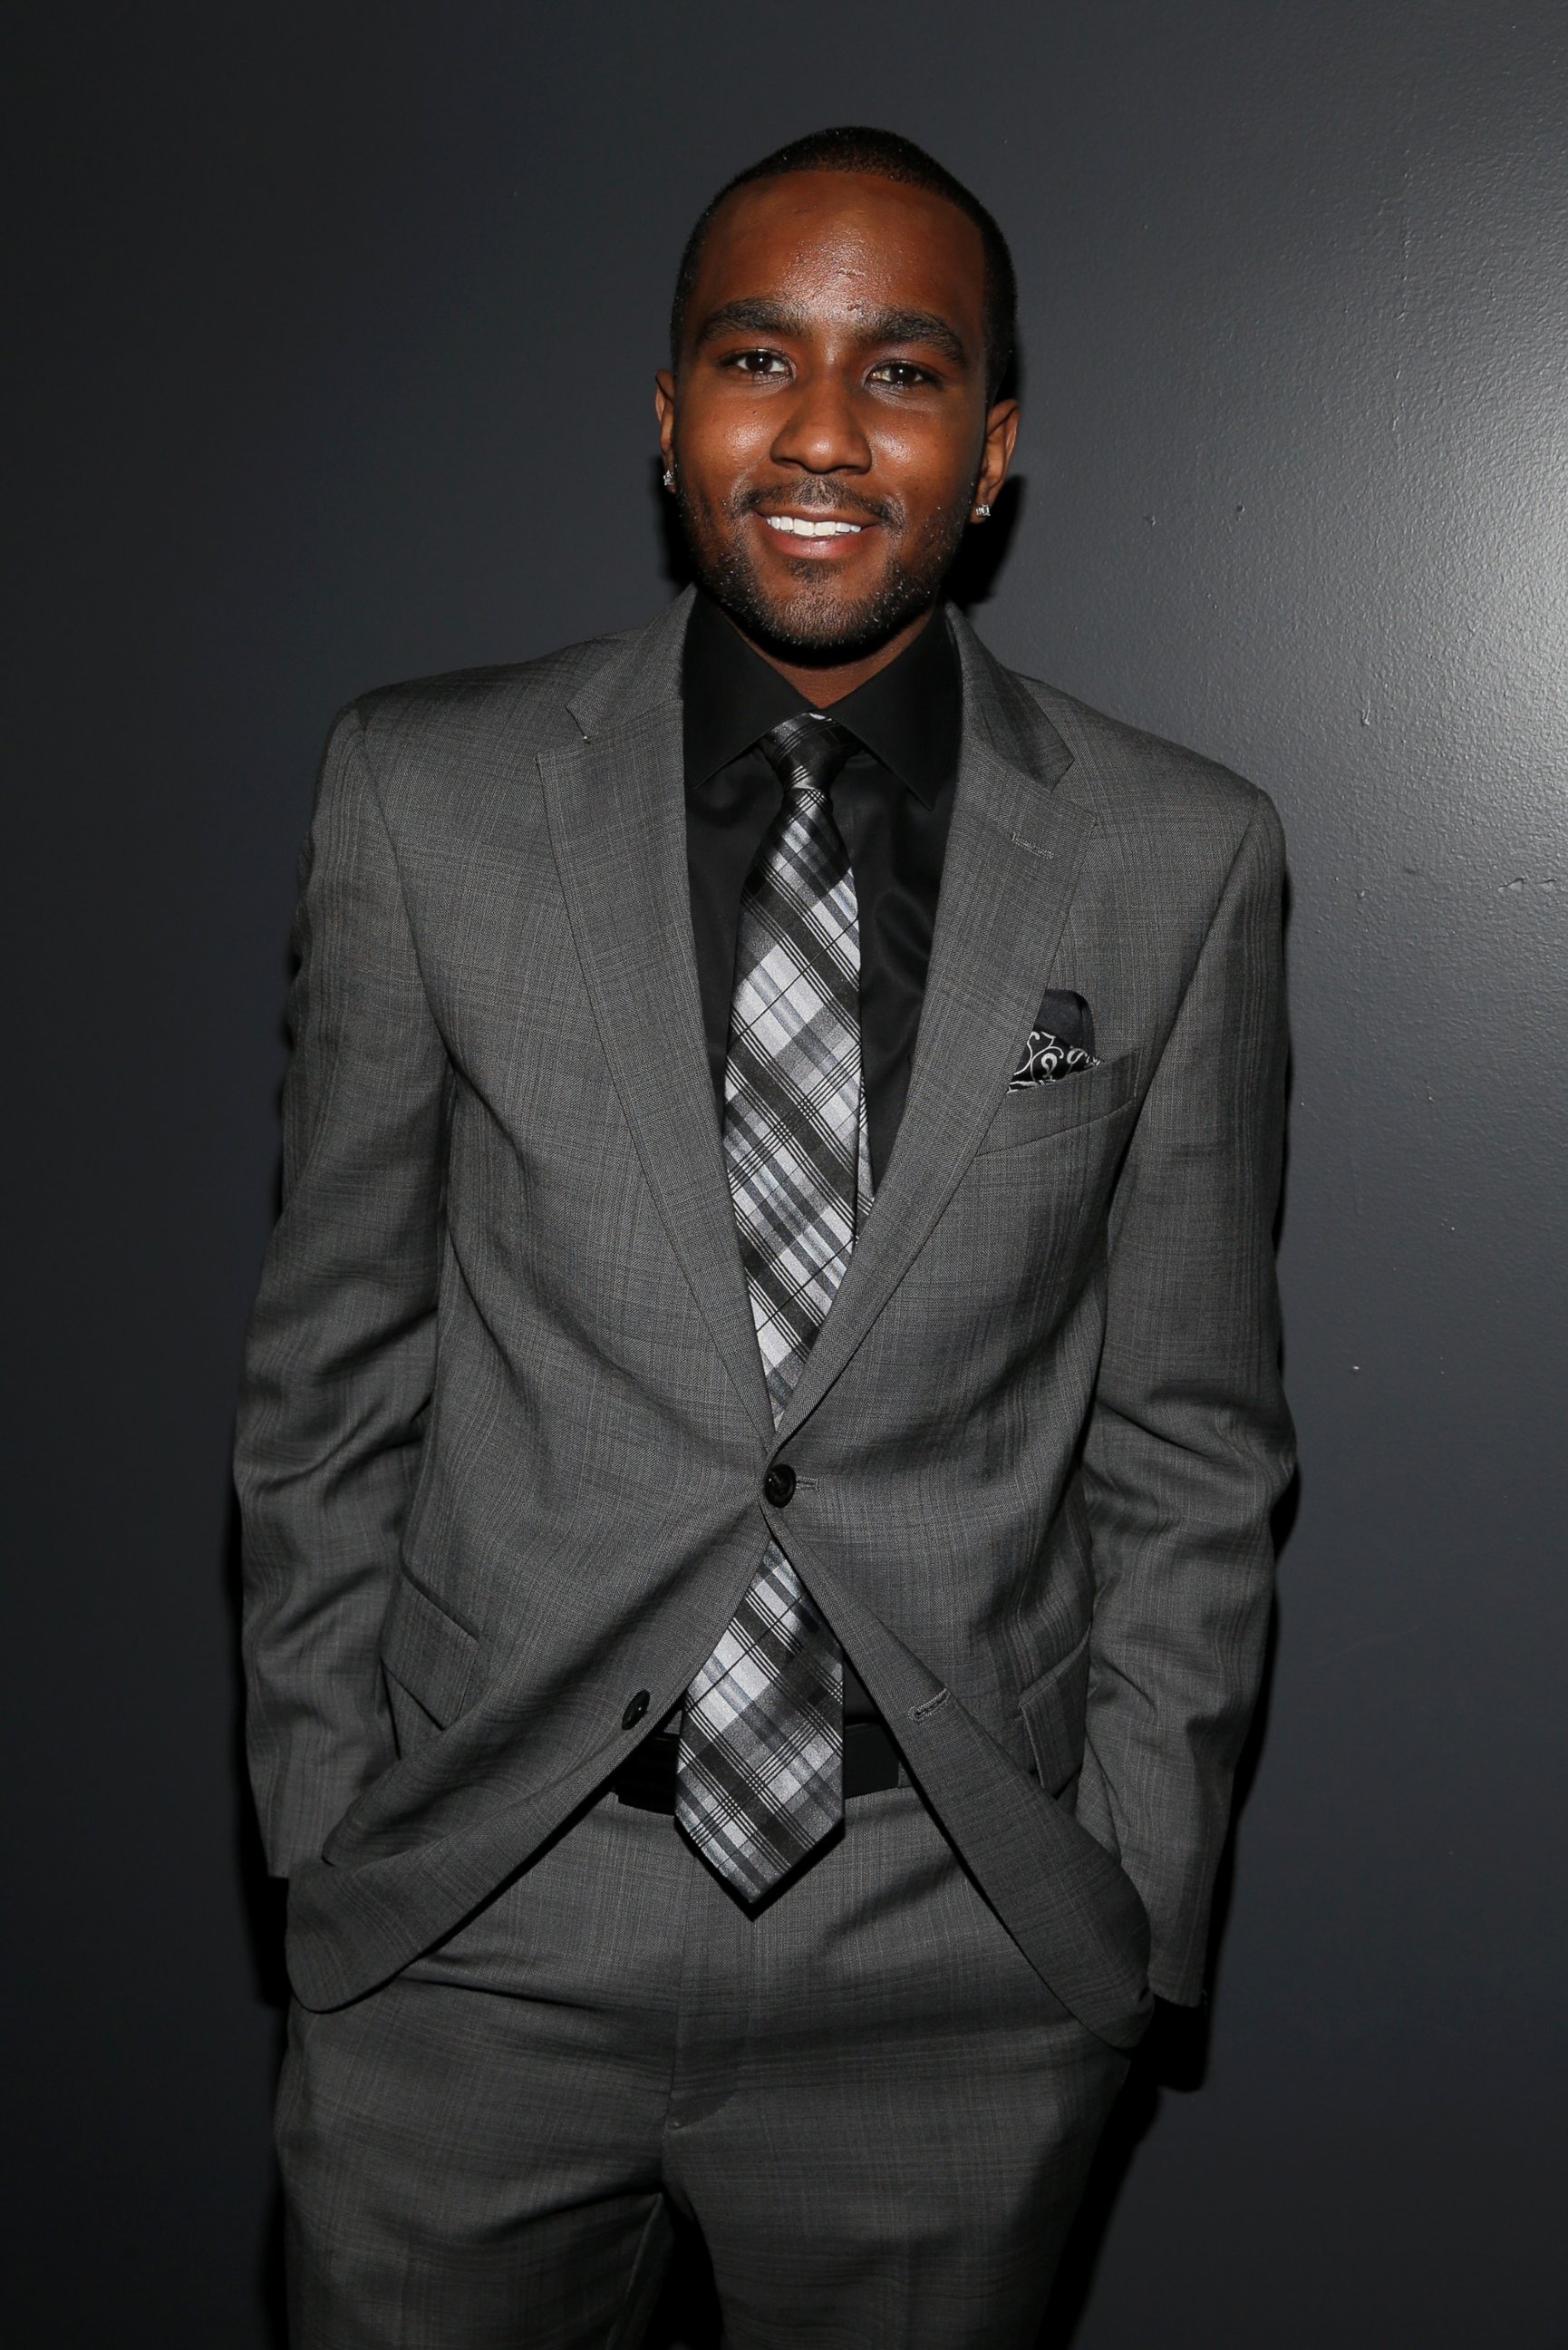 PHOTO: Nick Gordon attends "We Will Always Love You: A GRAMMY Salute to Whitney Houston" on October 11, 2012 in Los Angeles, Calif.  